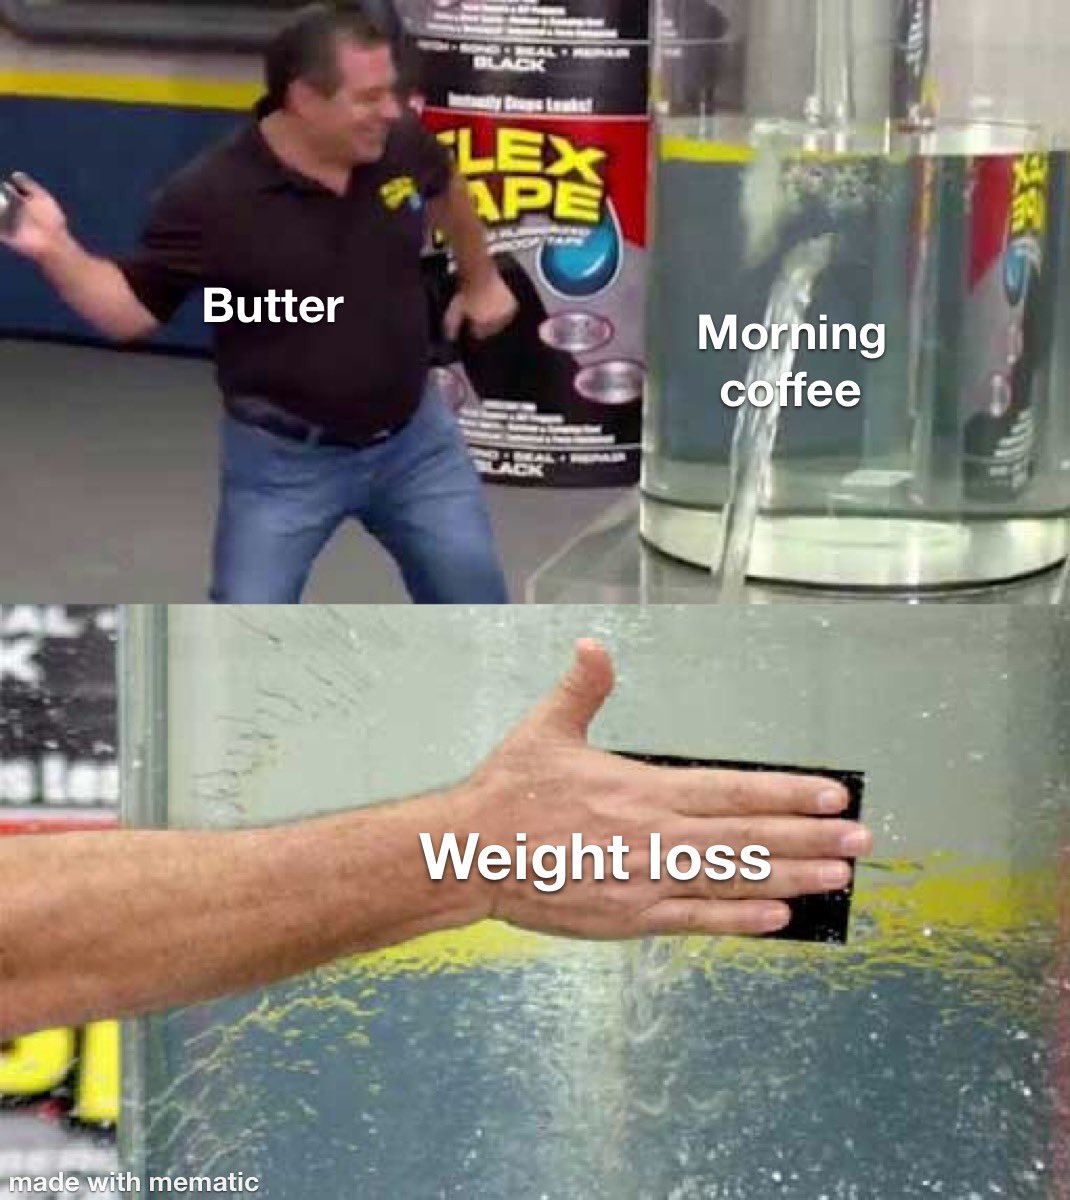 The thinking of a genius…/Moron.

@daveasprey  is a massive charlatan  / nut case. The idea of putting butter in coffee is ludicrous advice for an overweight person to do. 

Achieve a deficit, meet protein needs, exercise daily, avoid fads, and have success.

#weightloss #fit